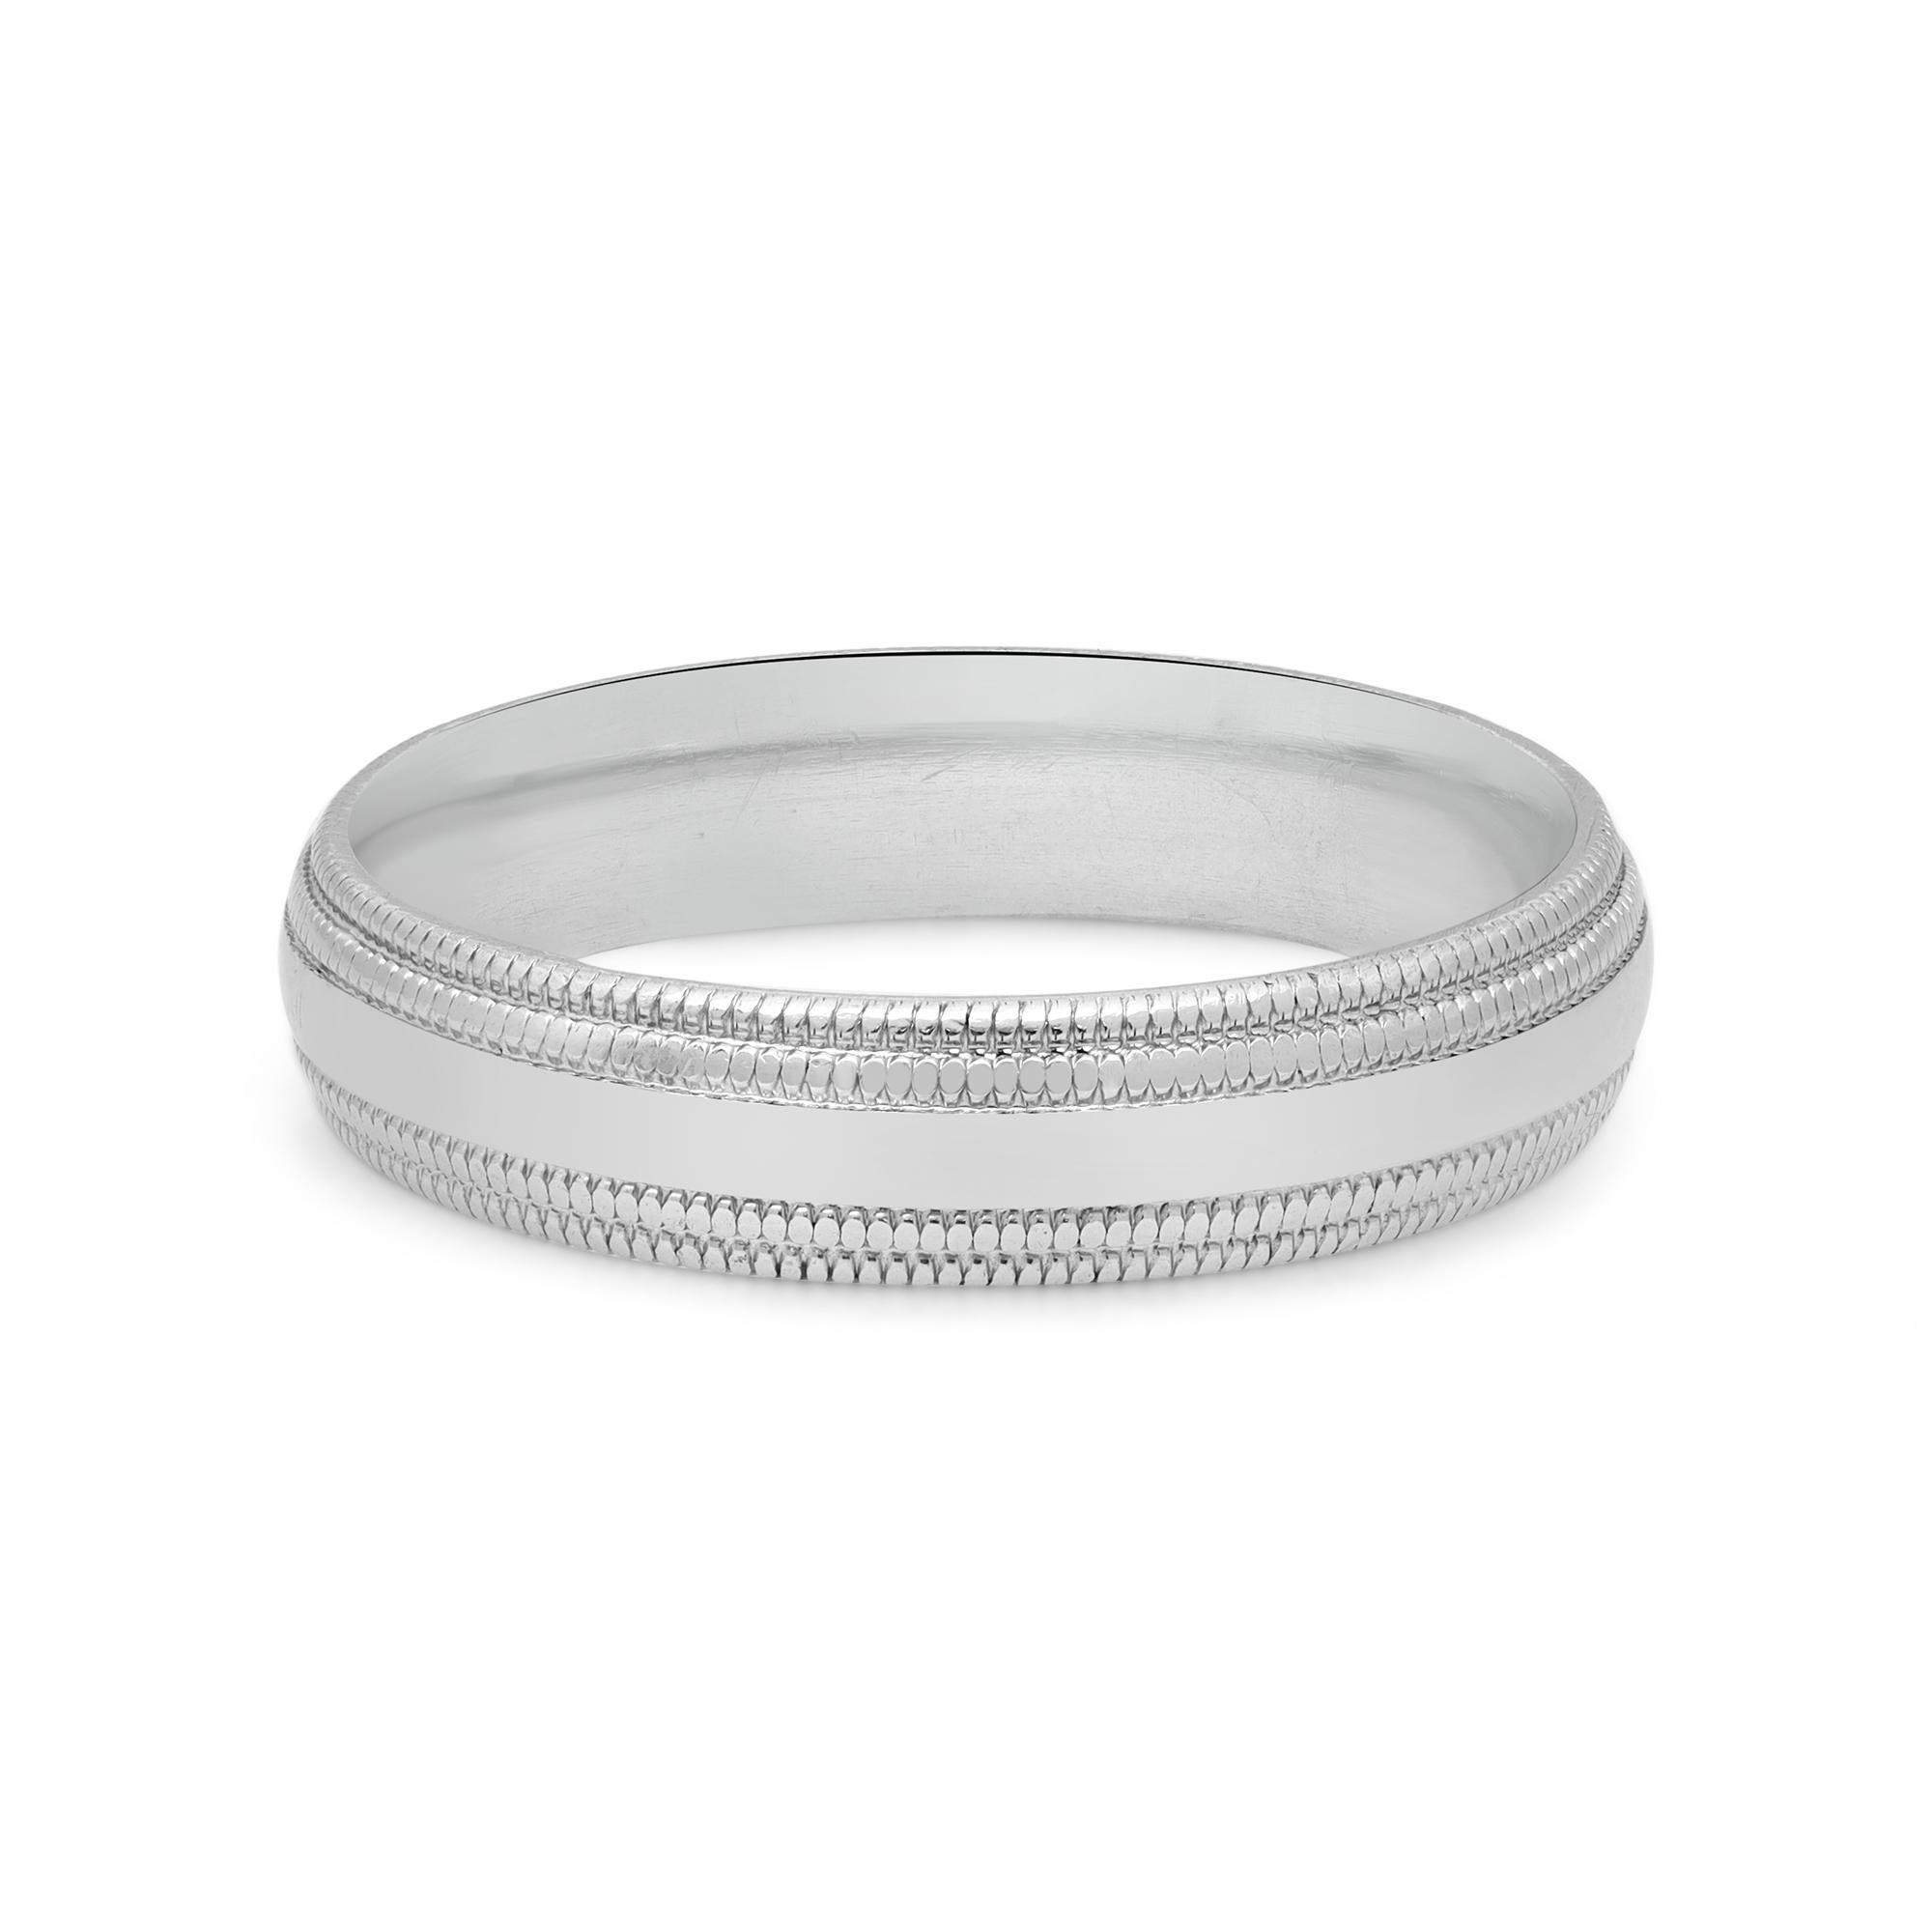 Classic men's wedding band ring. Crafted in fine high polished platinum. Ring size 10.5. Width: 4.9 mm. Total weight: 8.90 grams. Excellent pre-owned condition. Comes with a presentable gift box.
